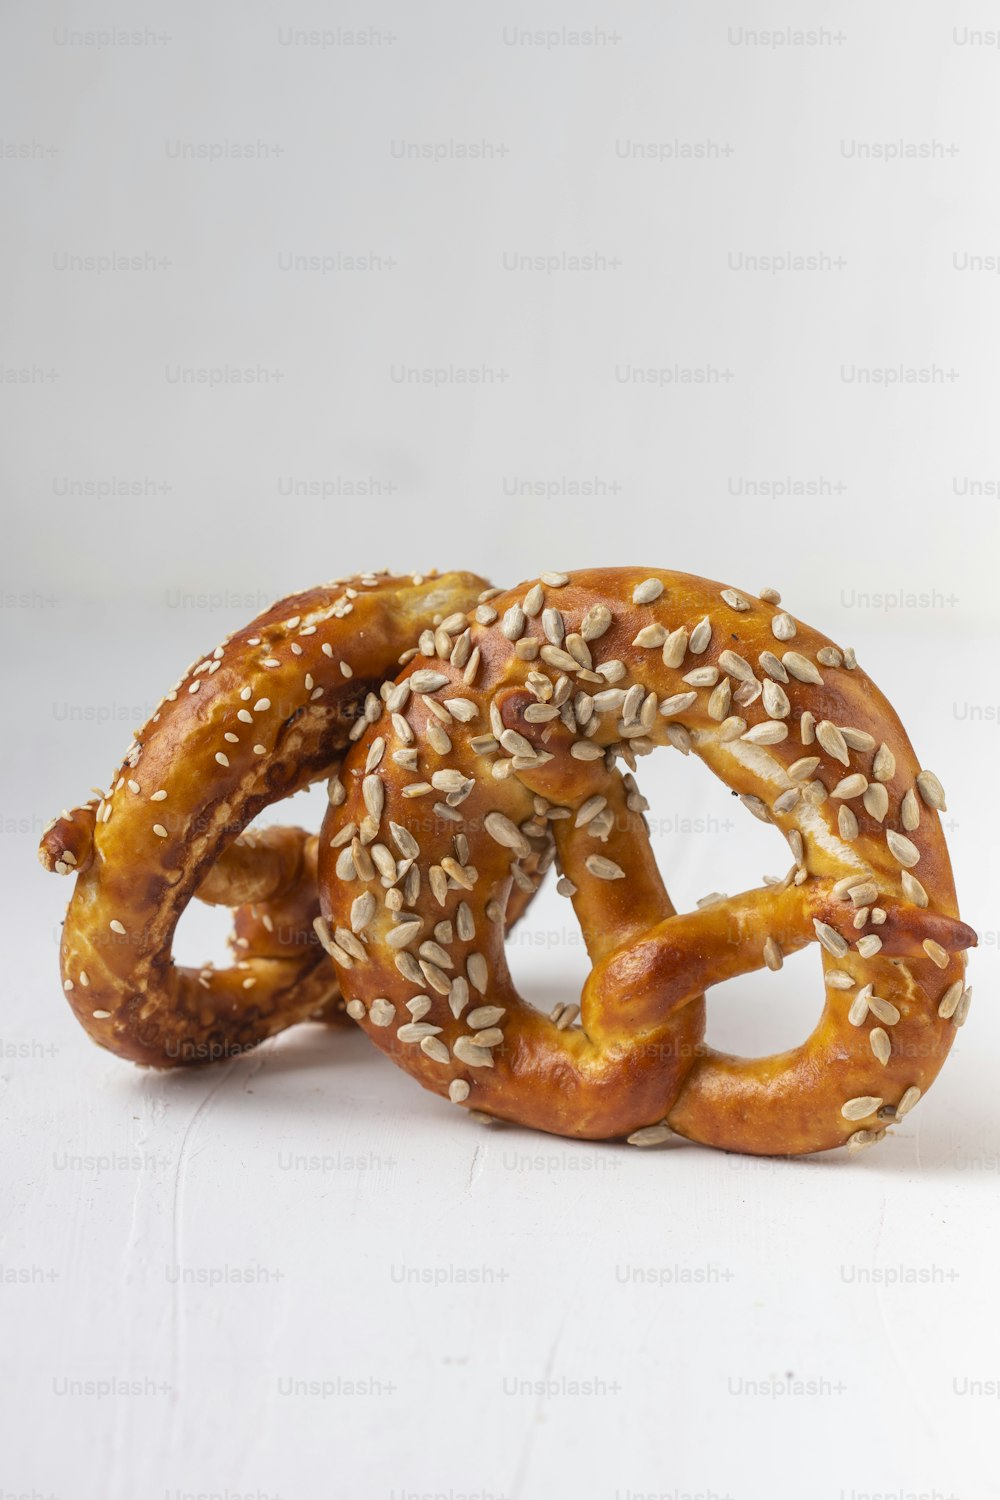 a couple of pretzels with sesame seeds on them